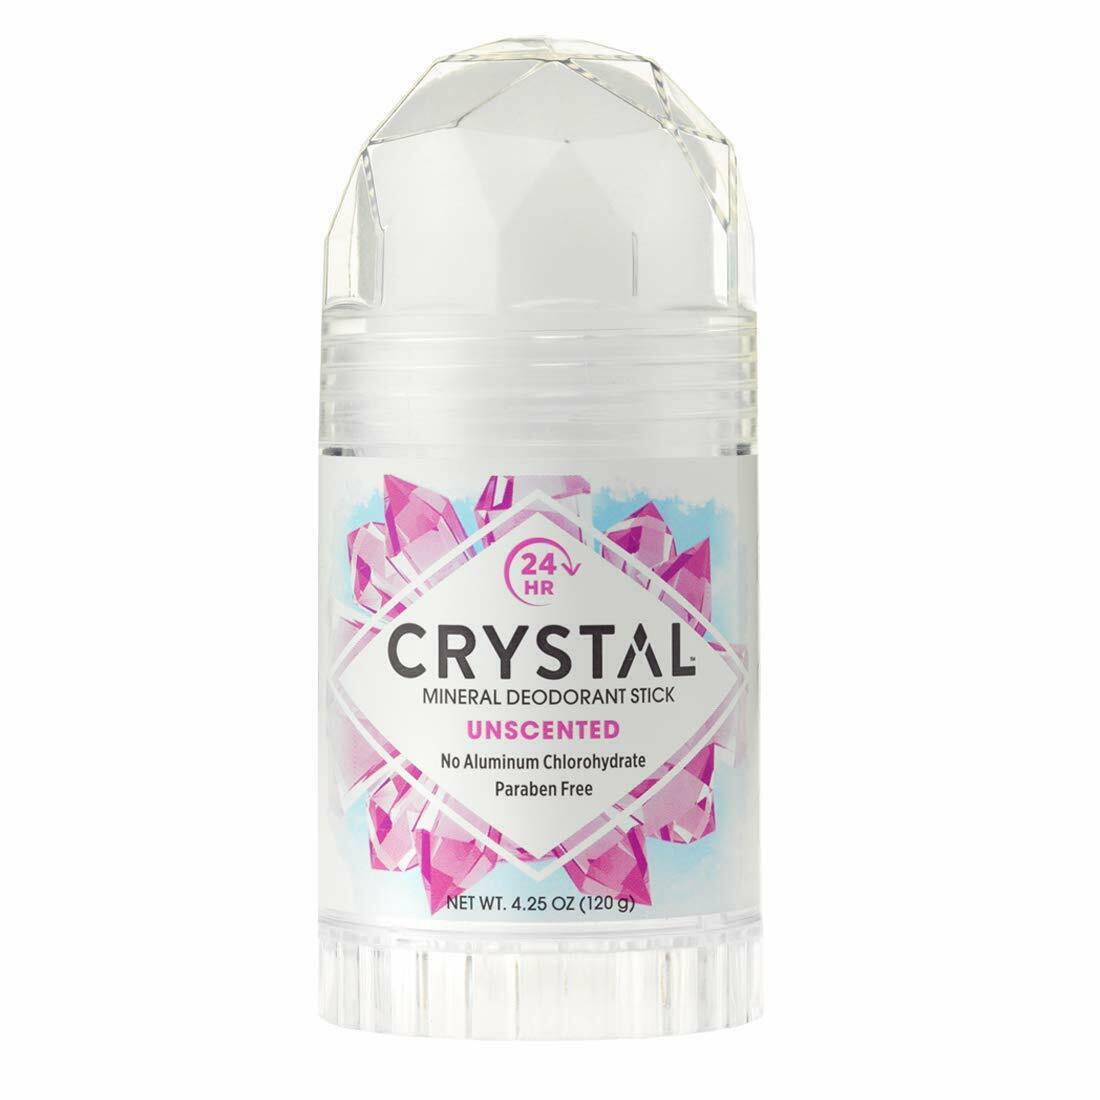 Crystal Mineral Deodorant Stick, Unscented, 4.25 oz